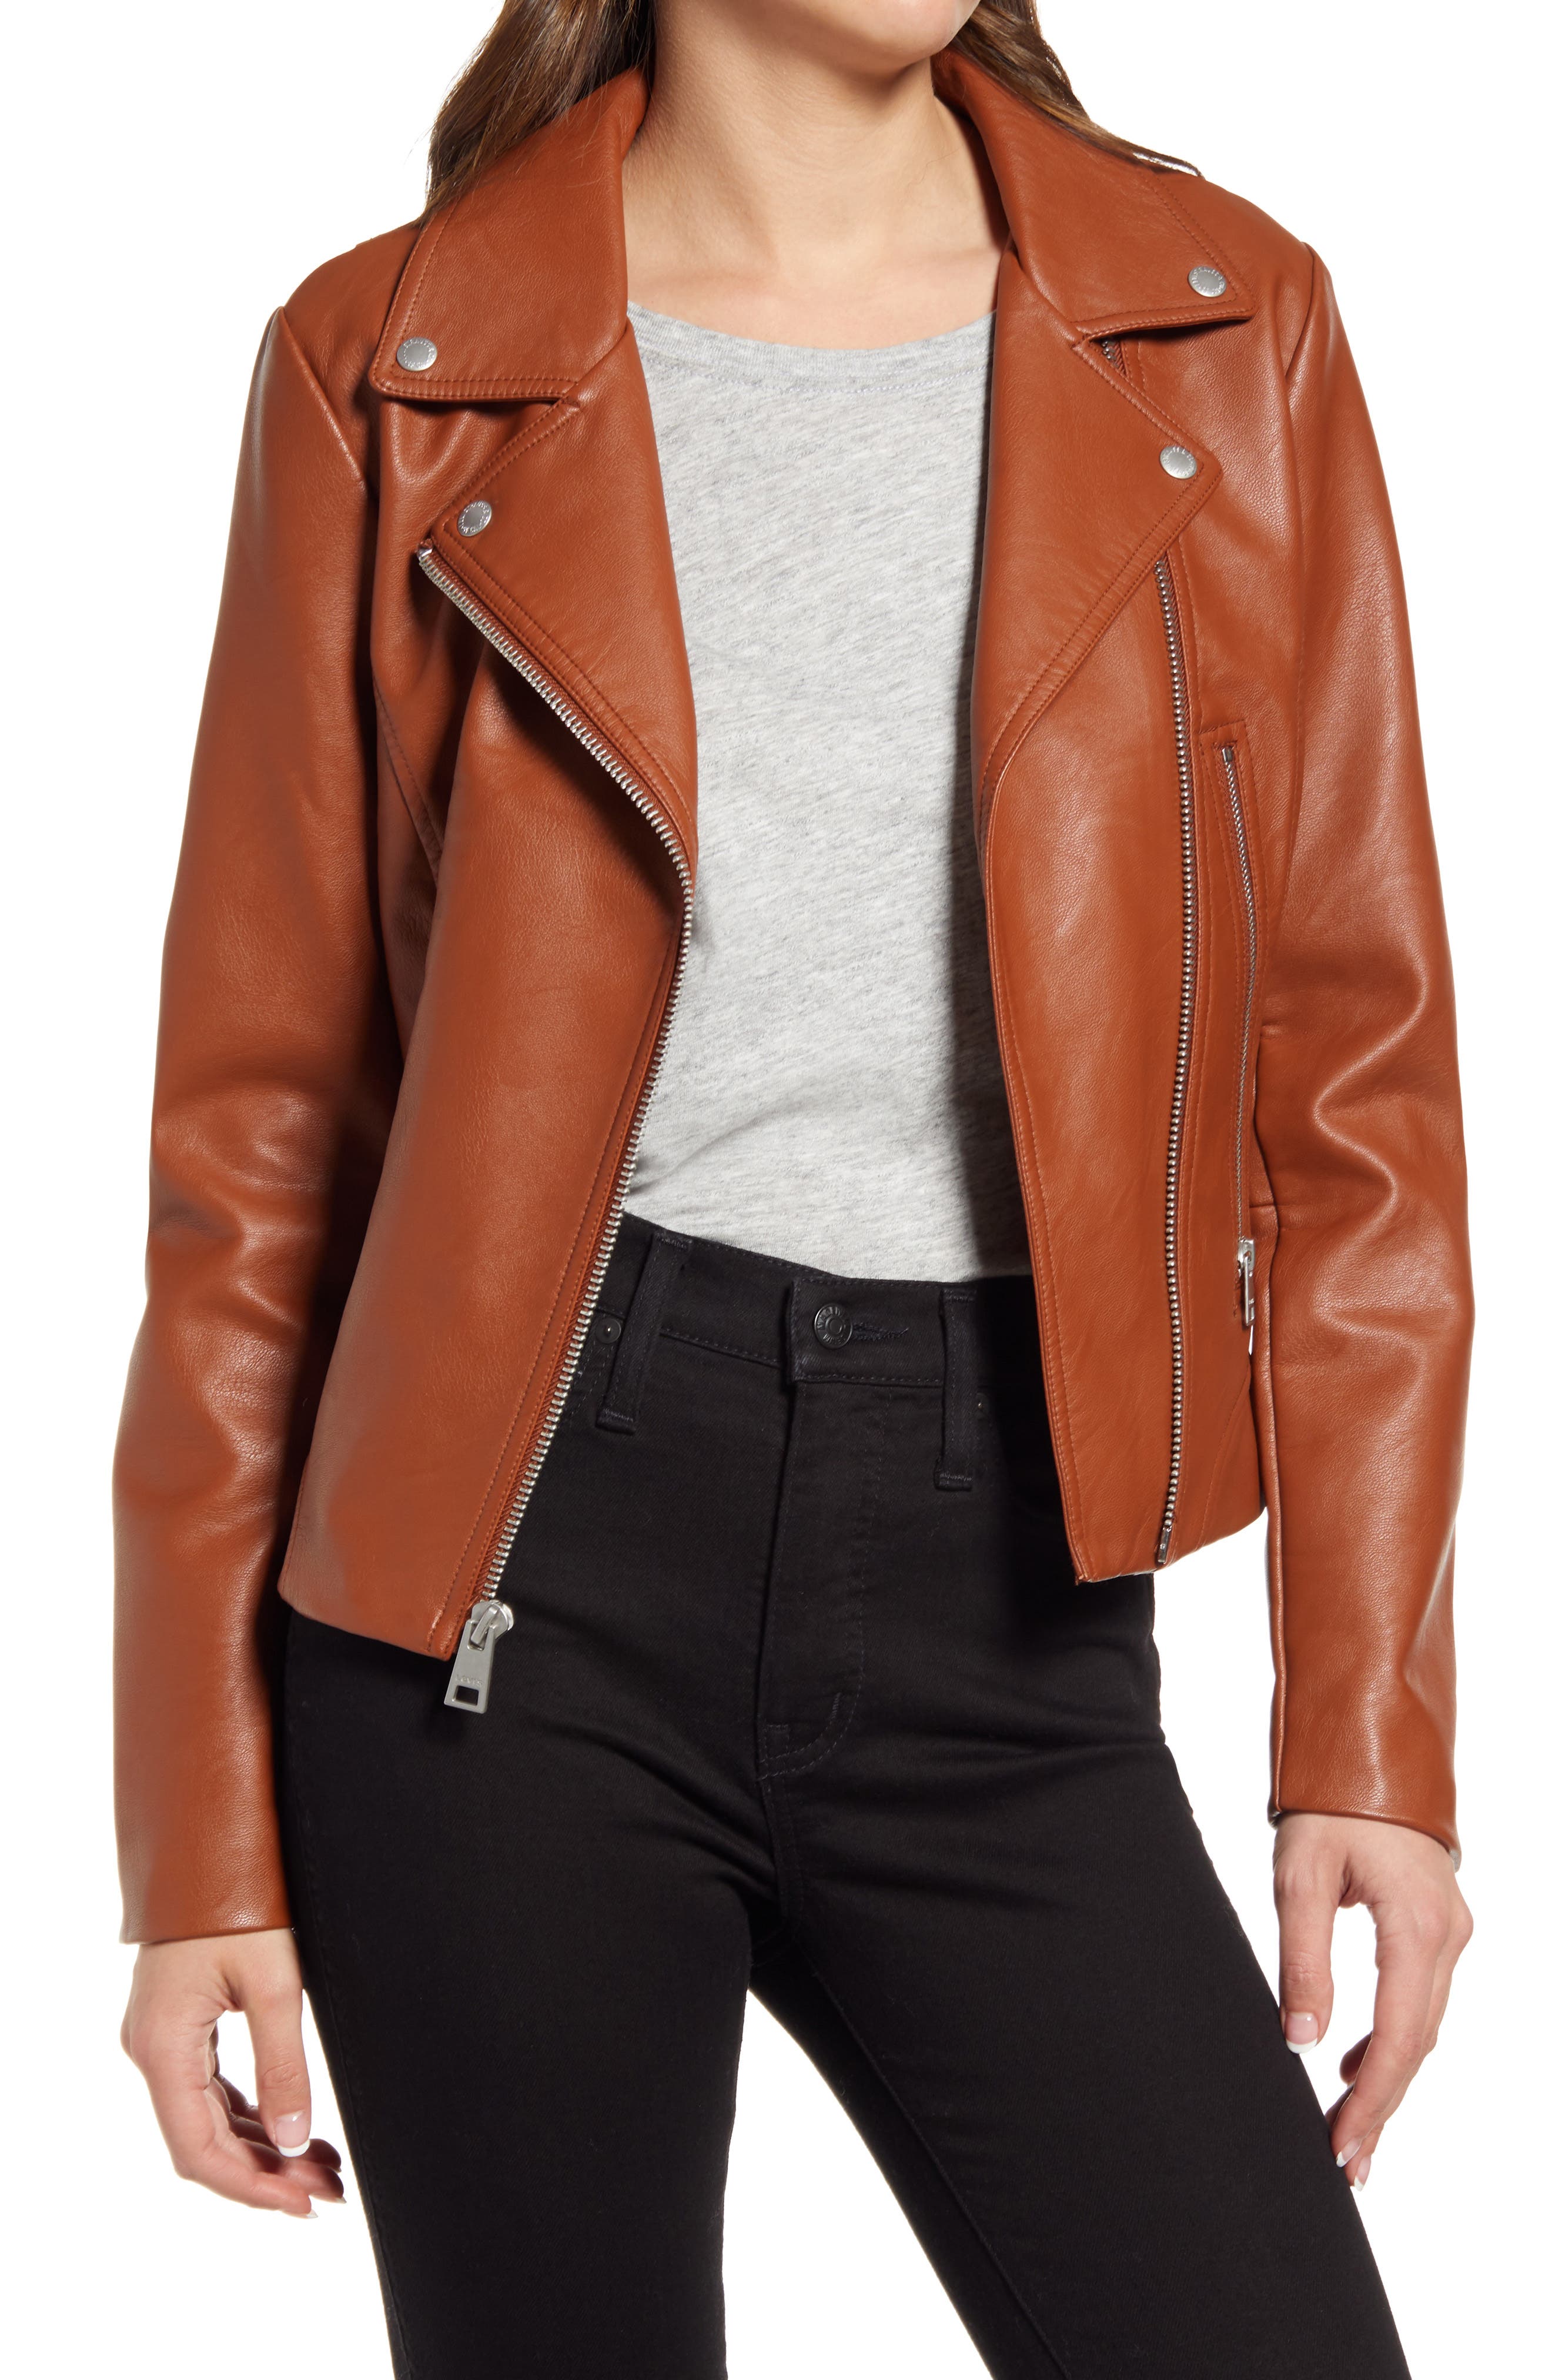 Ladies Bomber Leather Jacket TAN WAX Motorcycle Style REAL LEATHER JACKET 3758